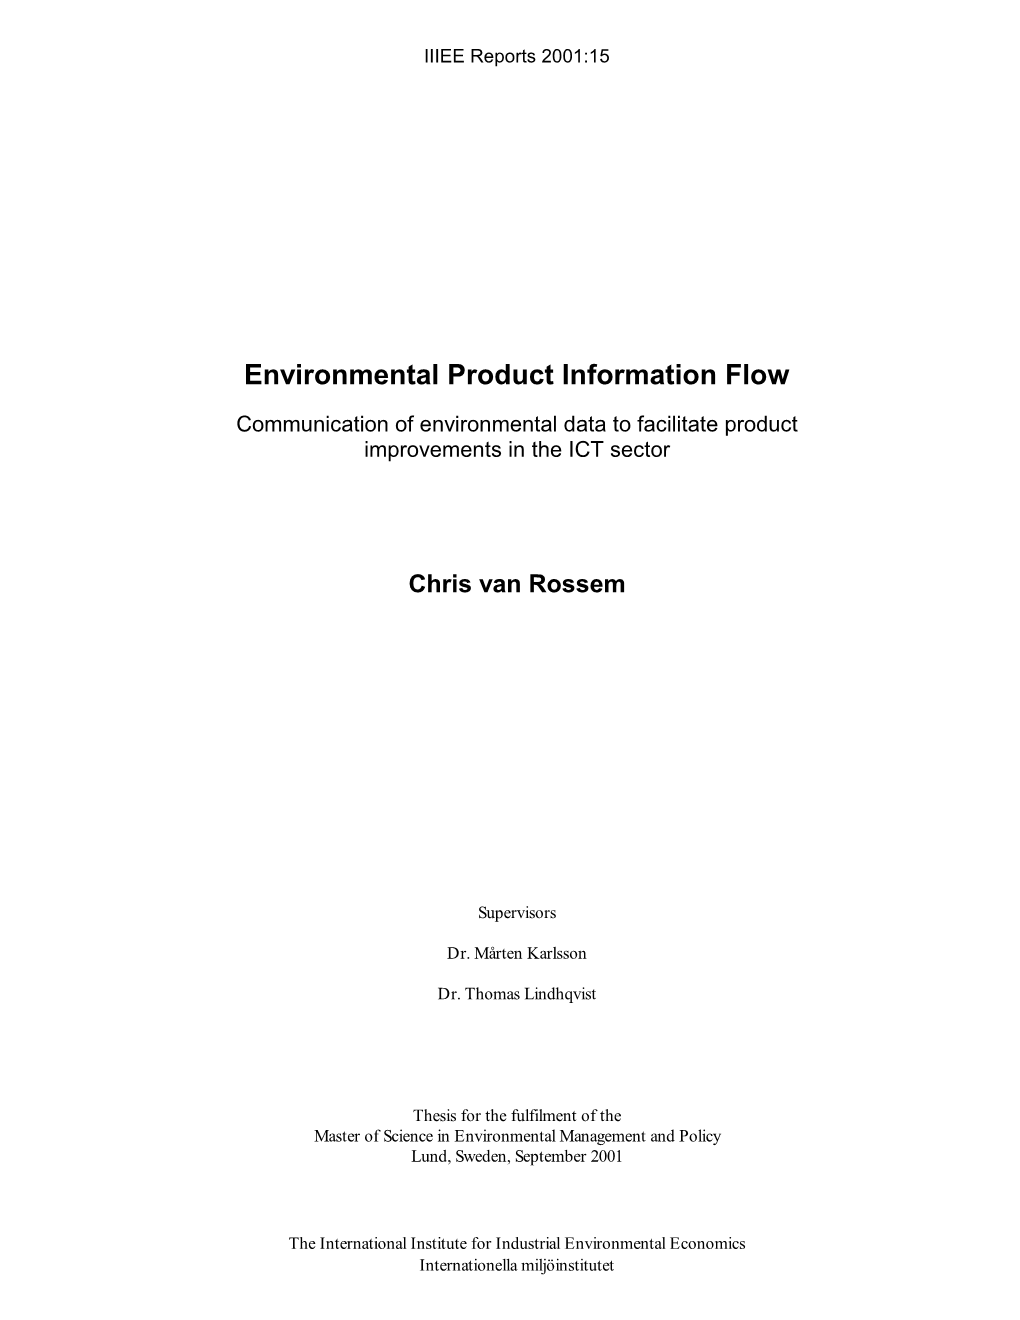 Environmental Product Information Flow